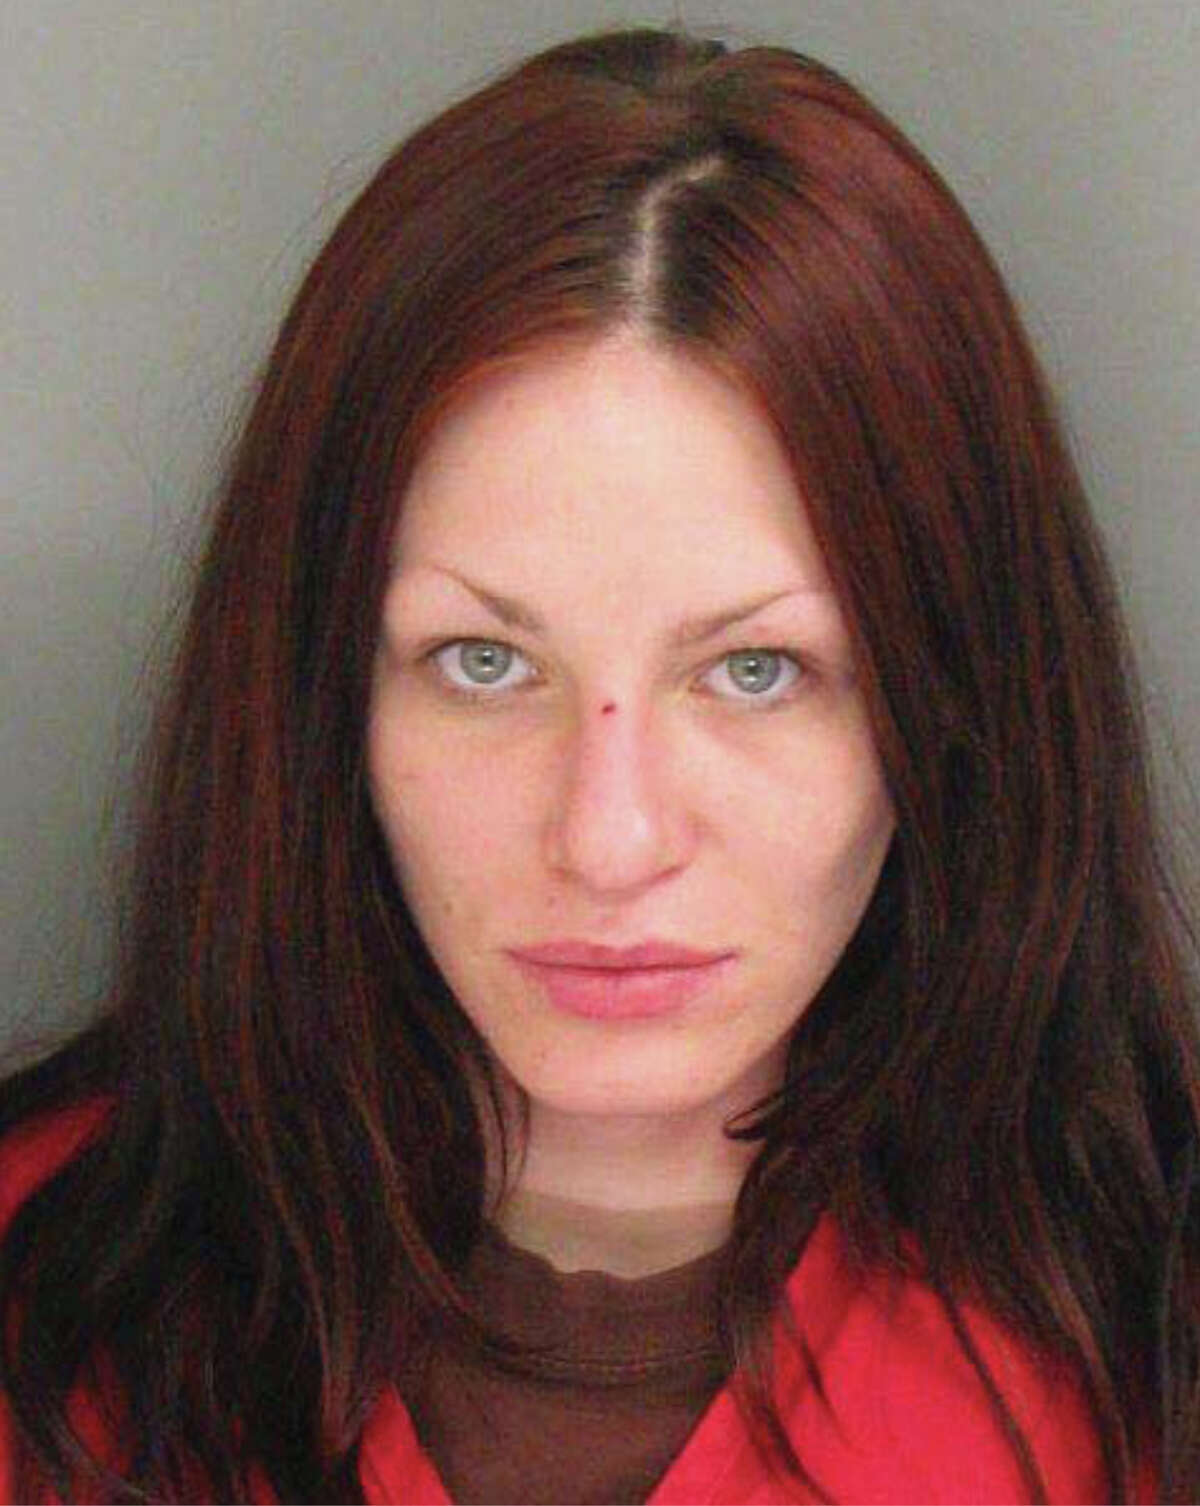 This image provided by the Santa Cruz Police Department shows Alix Catherine Tichleman after she was booked into county jail in Santa Cruz, Calif., on Friday, July 4, 2014. Tichleman was arrested on suspicion of murder after injecting heroin into a Google executive on his yacht in Santa Cruz and leaving him to die when he overdosed, according to police and a newspaper. (AP Photo/Santa Cruz Police)